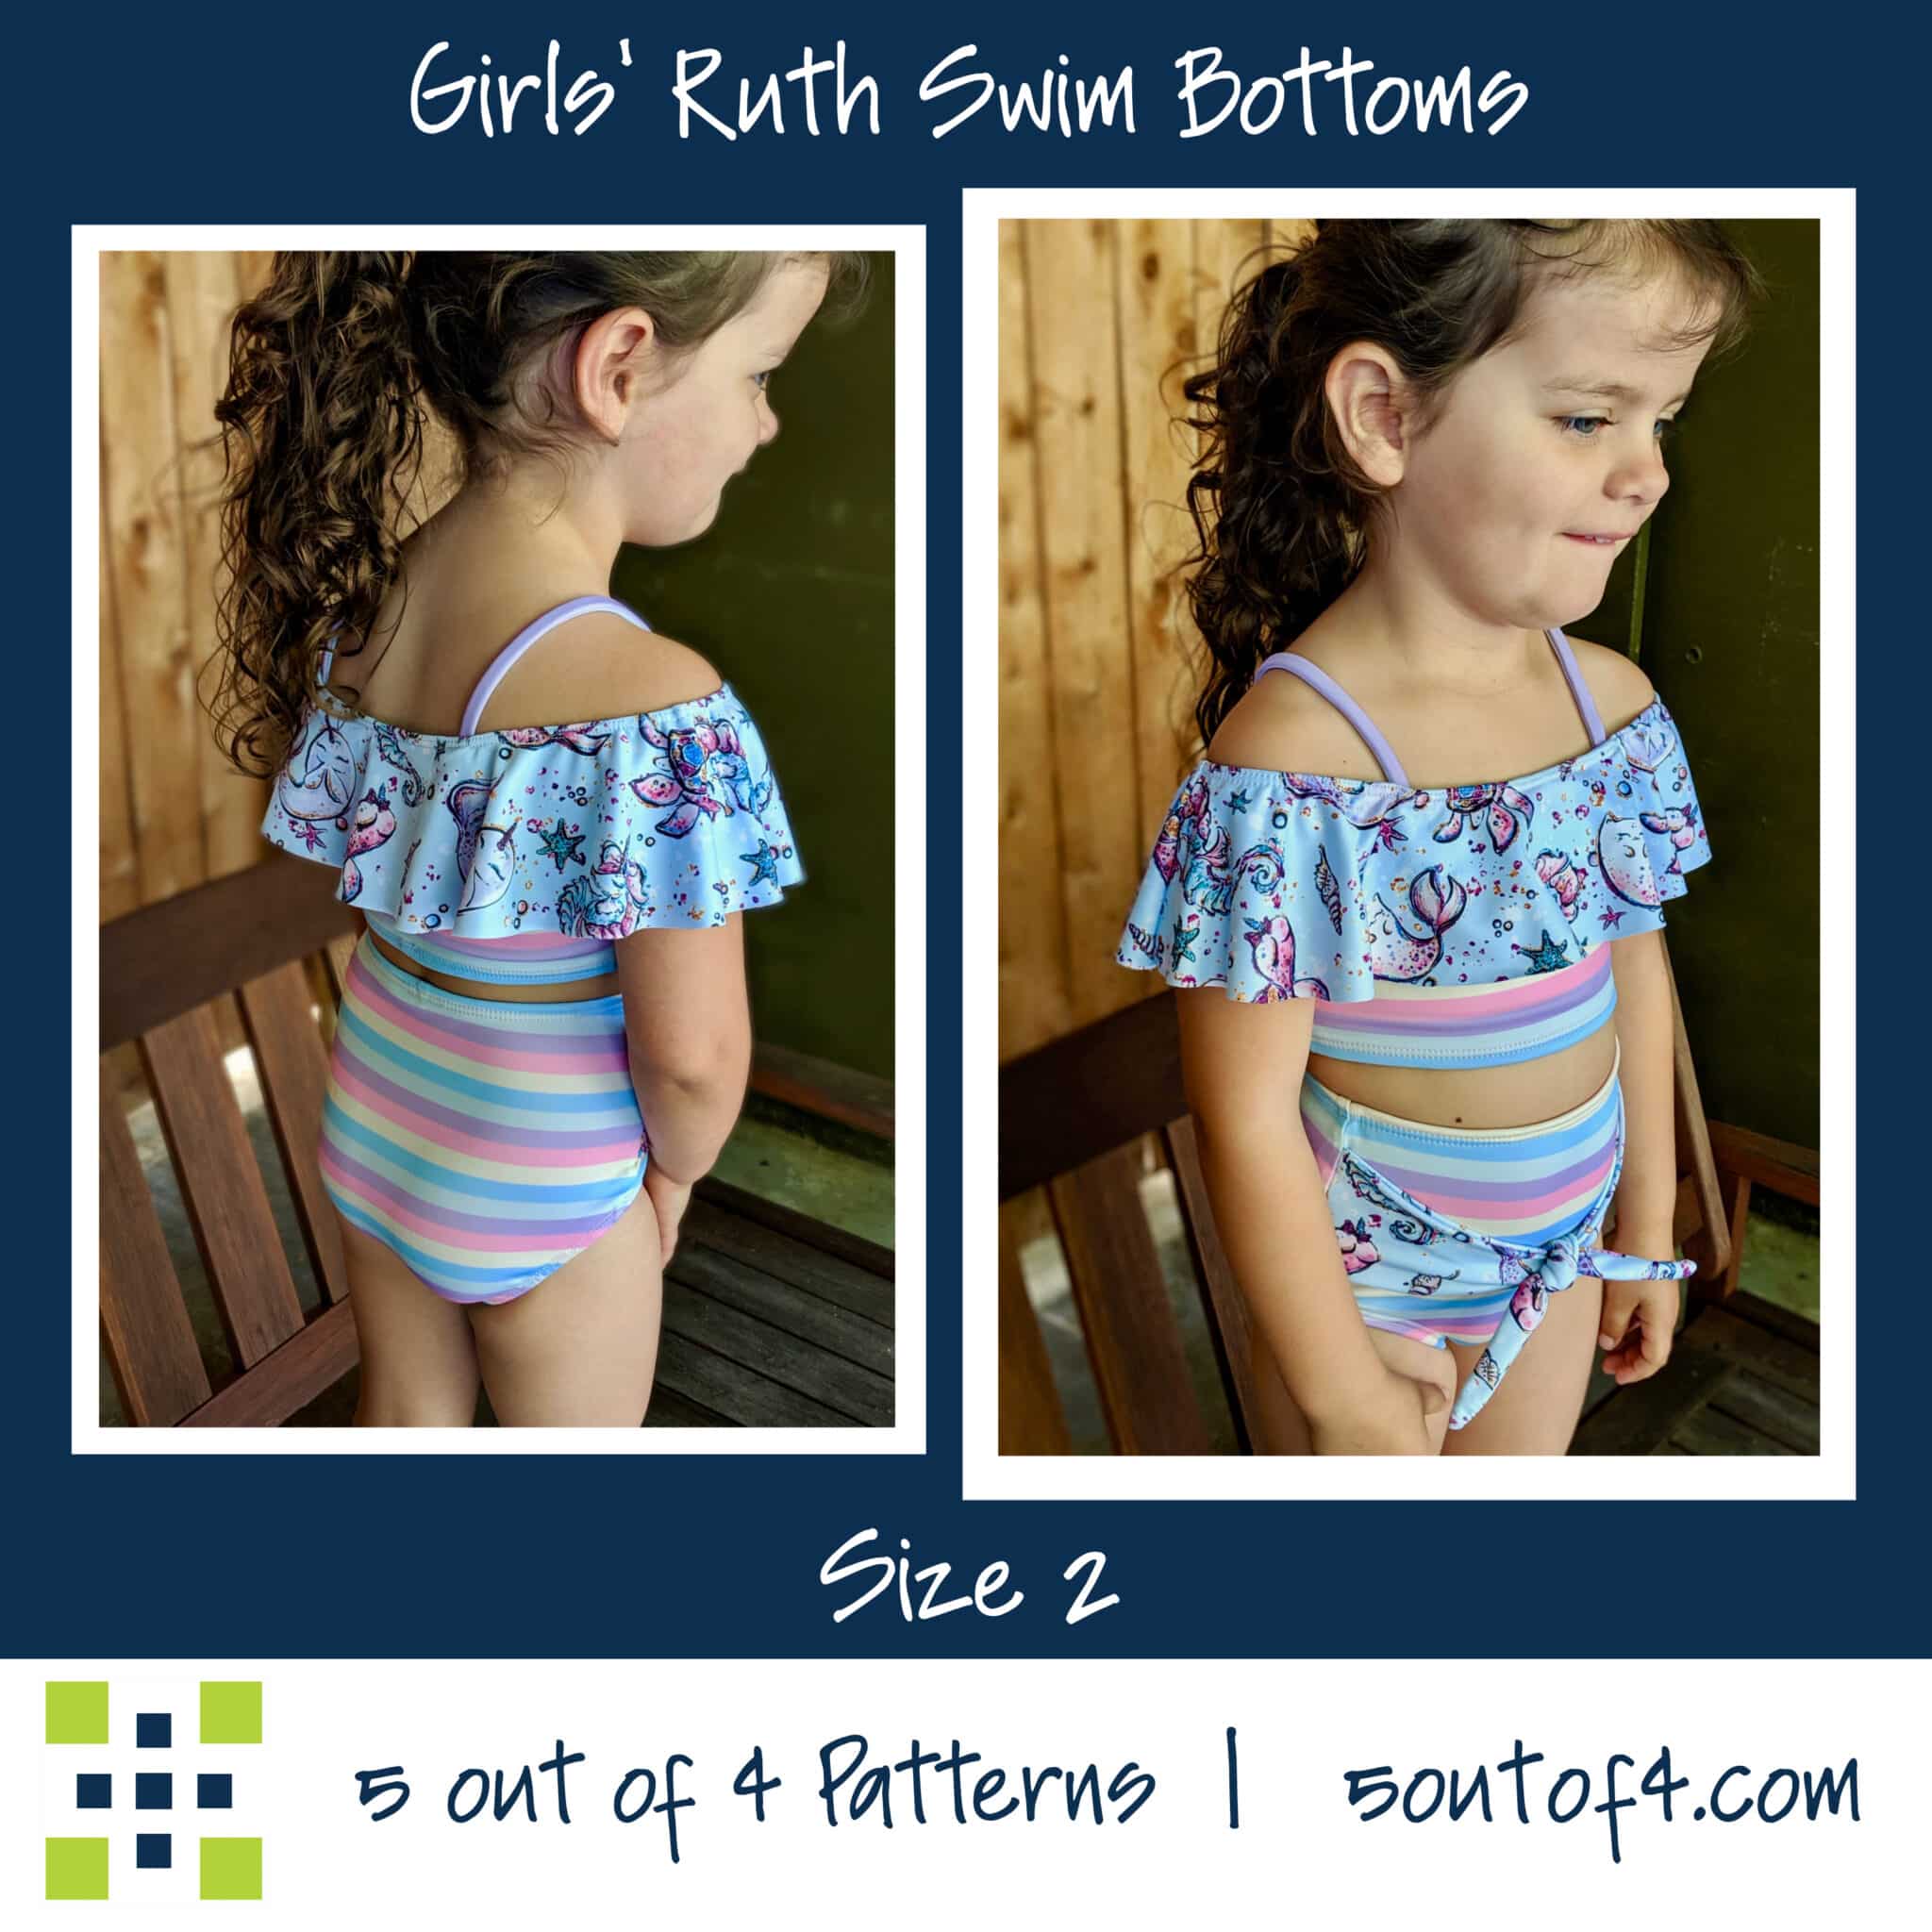 Kids' Ruth Swim Bottoms - 5 out of 4 Patterns